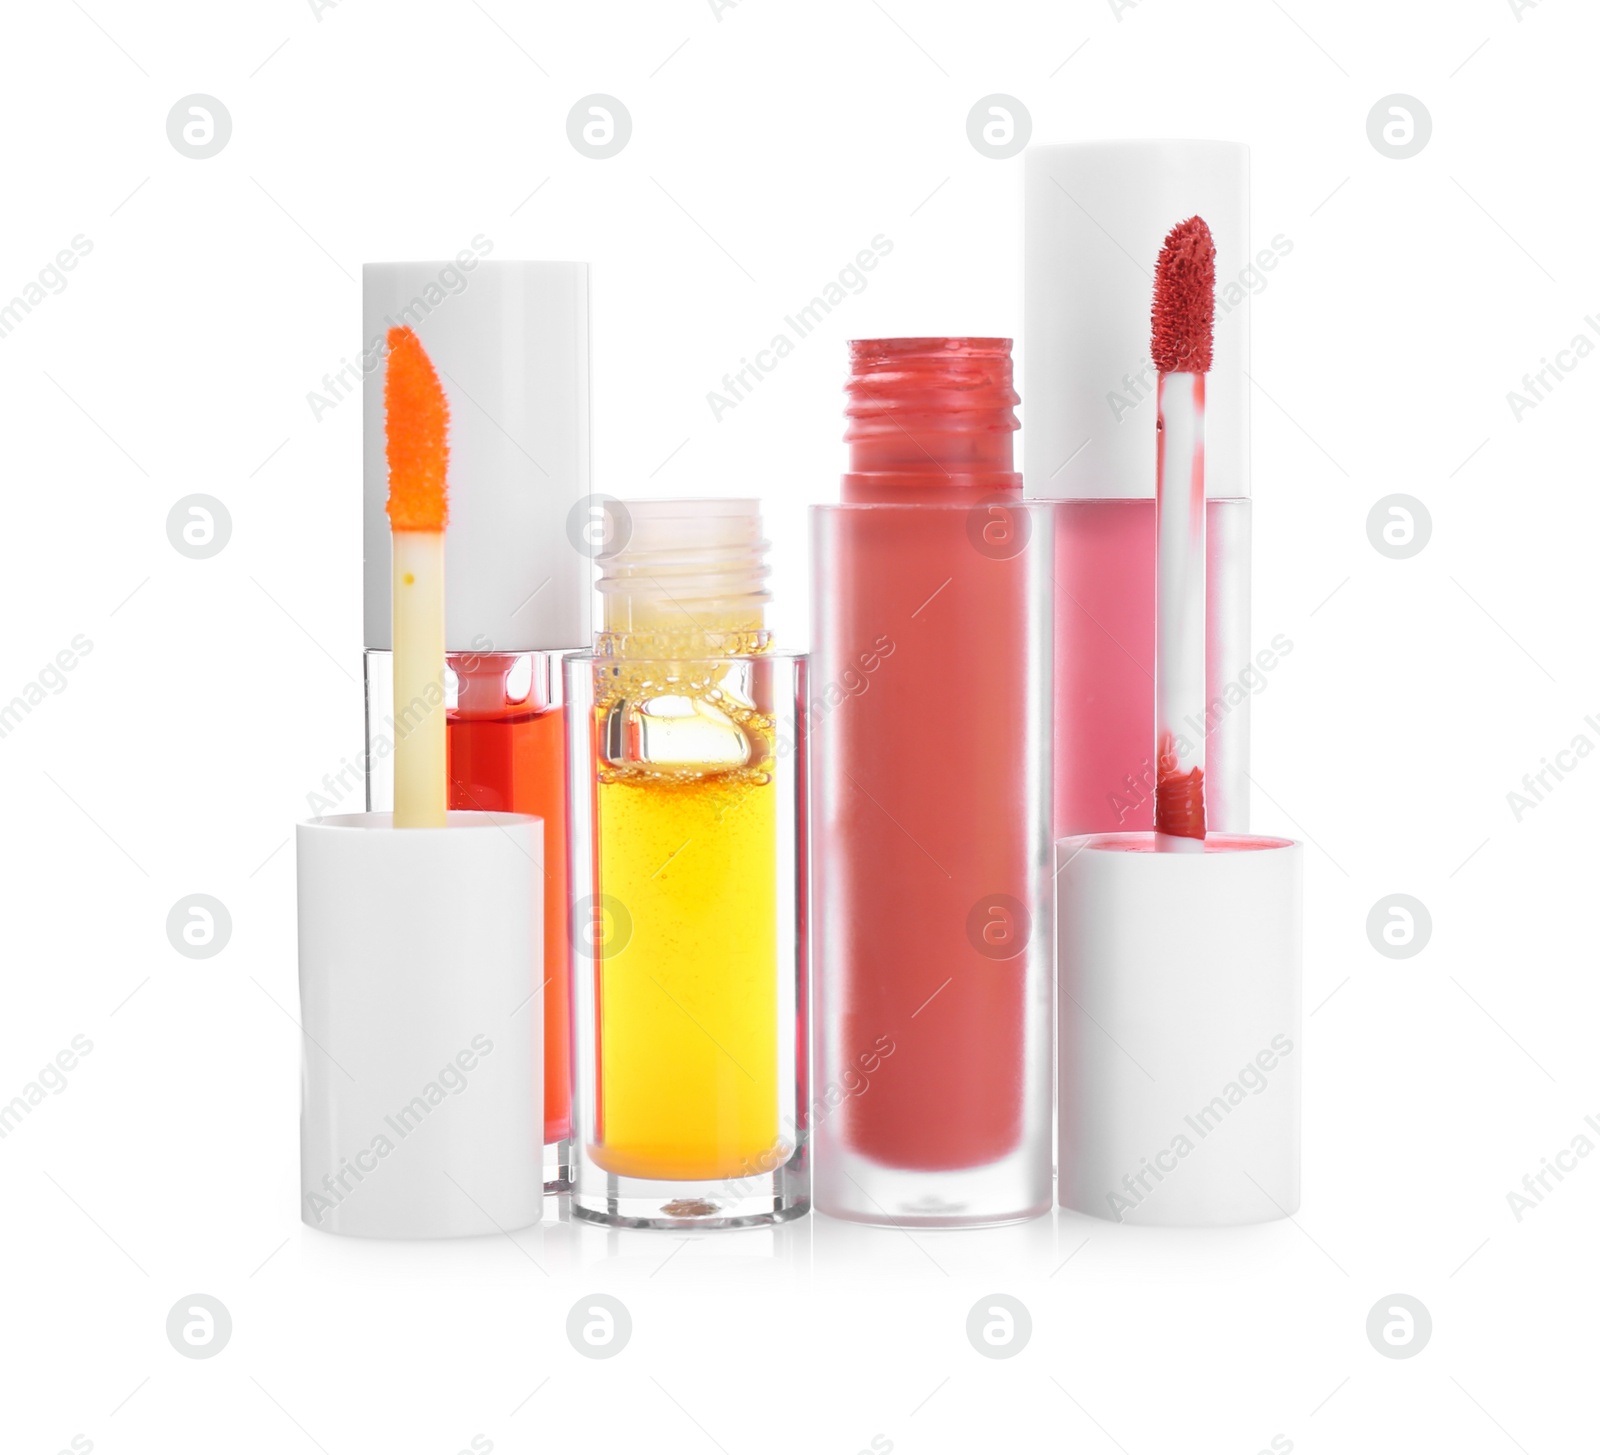 Photo of Different lip glosses and applicators isolated on white